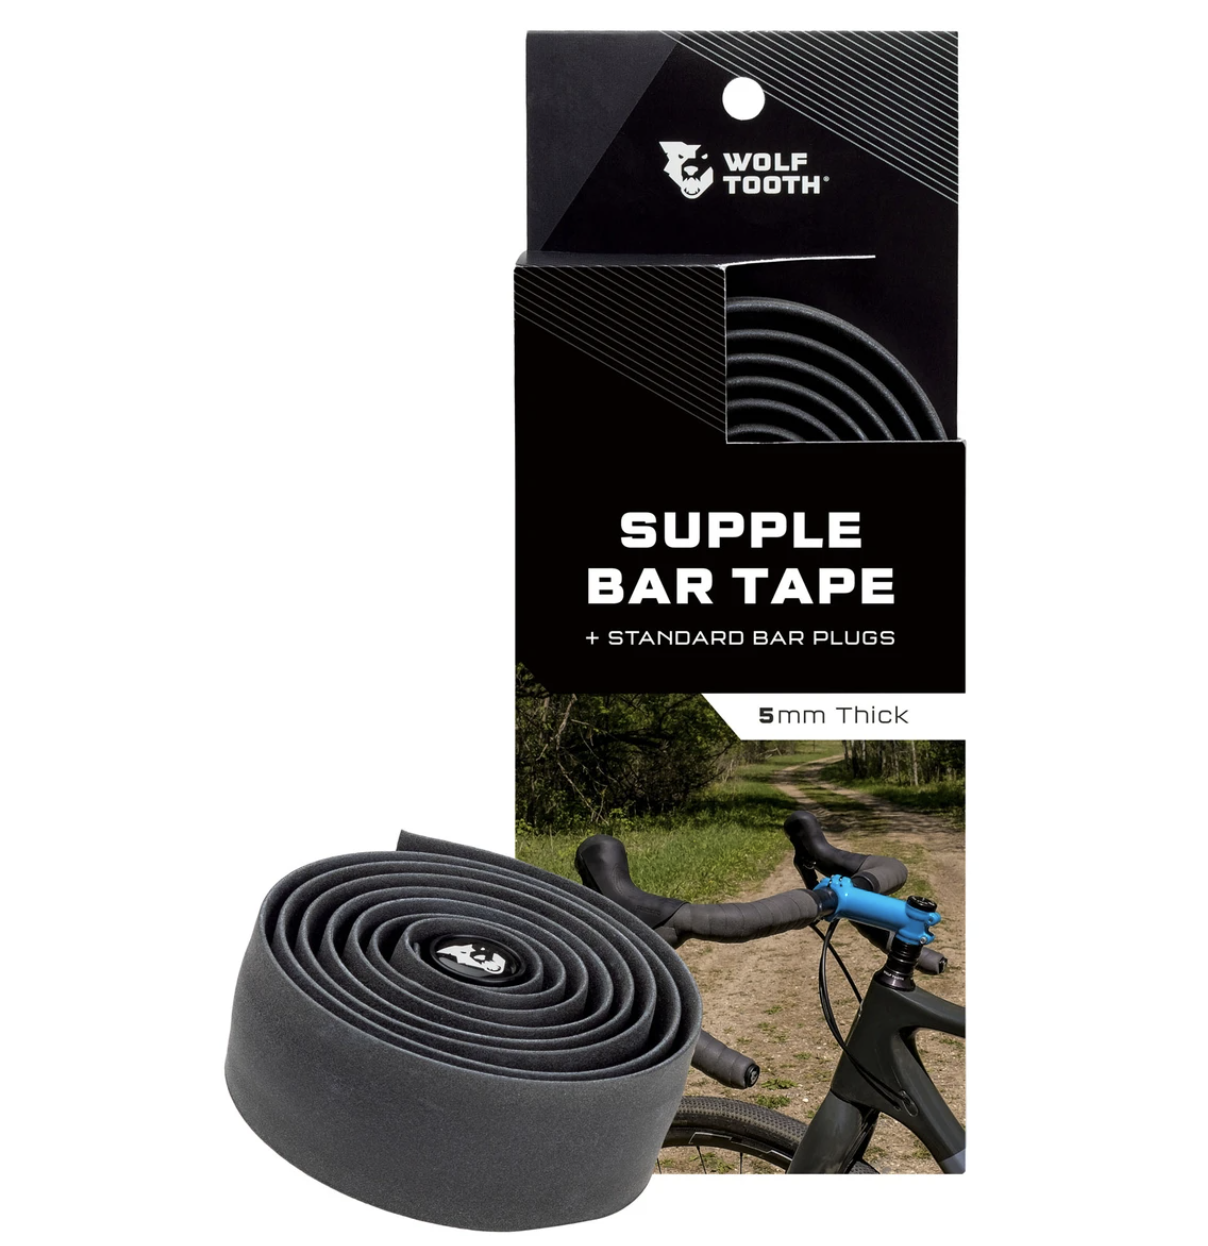 GUIDOLINE WOLF TOOTH SUPPLE BARE TAPE